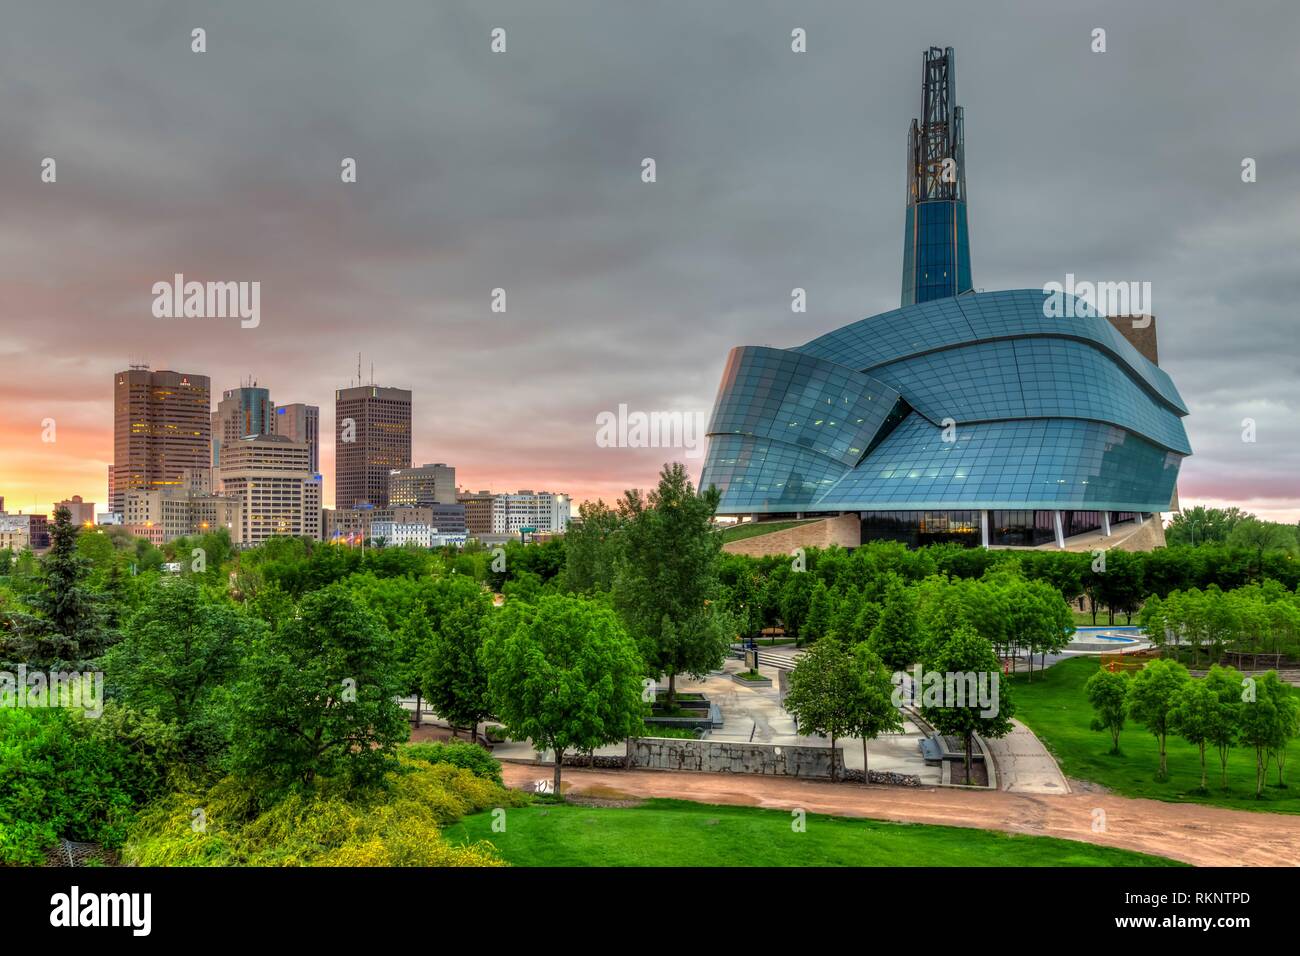 The city skyline of Winnipeg, Manitoba Canada from The Forks National Historic site. Stock Photo